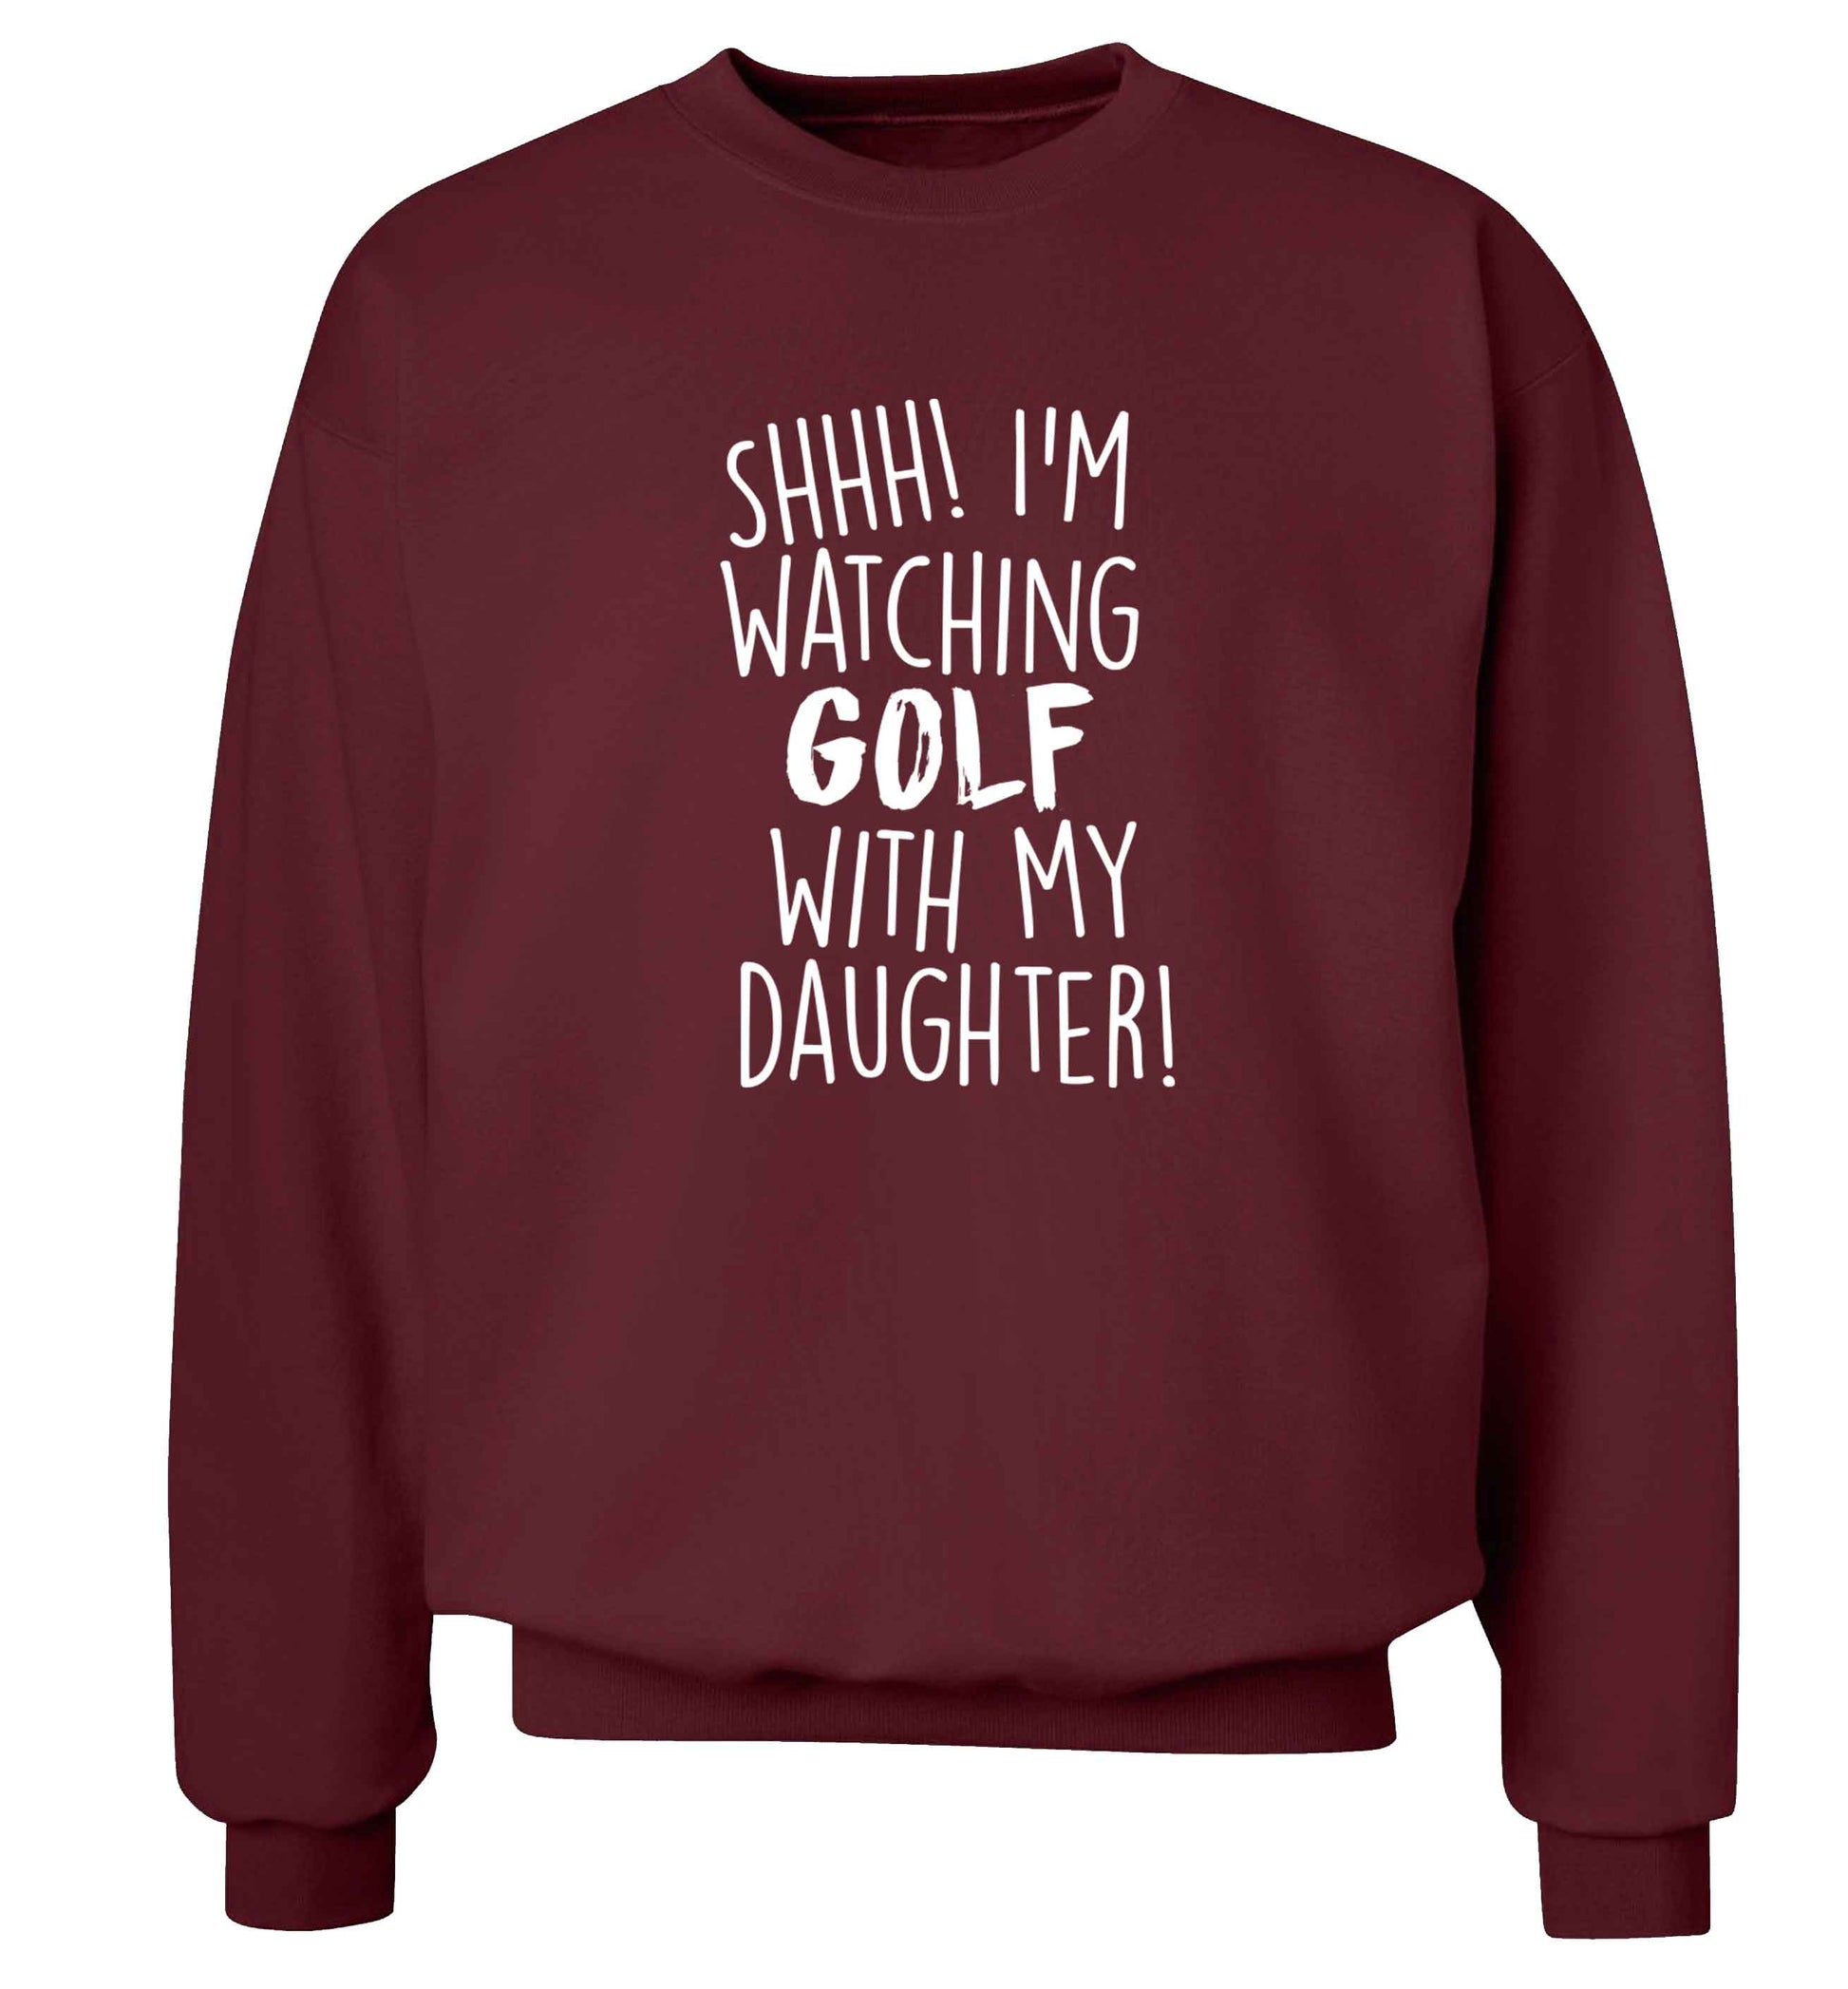 Shh I'm watching golf with my daughter Adult's unisex maroon Sweater 2XL